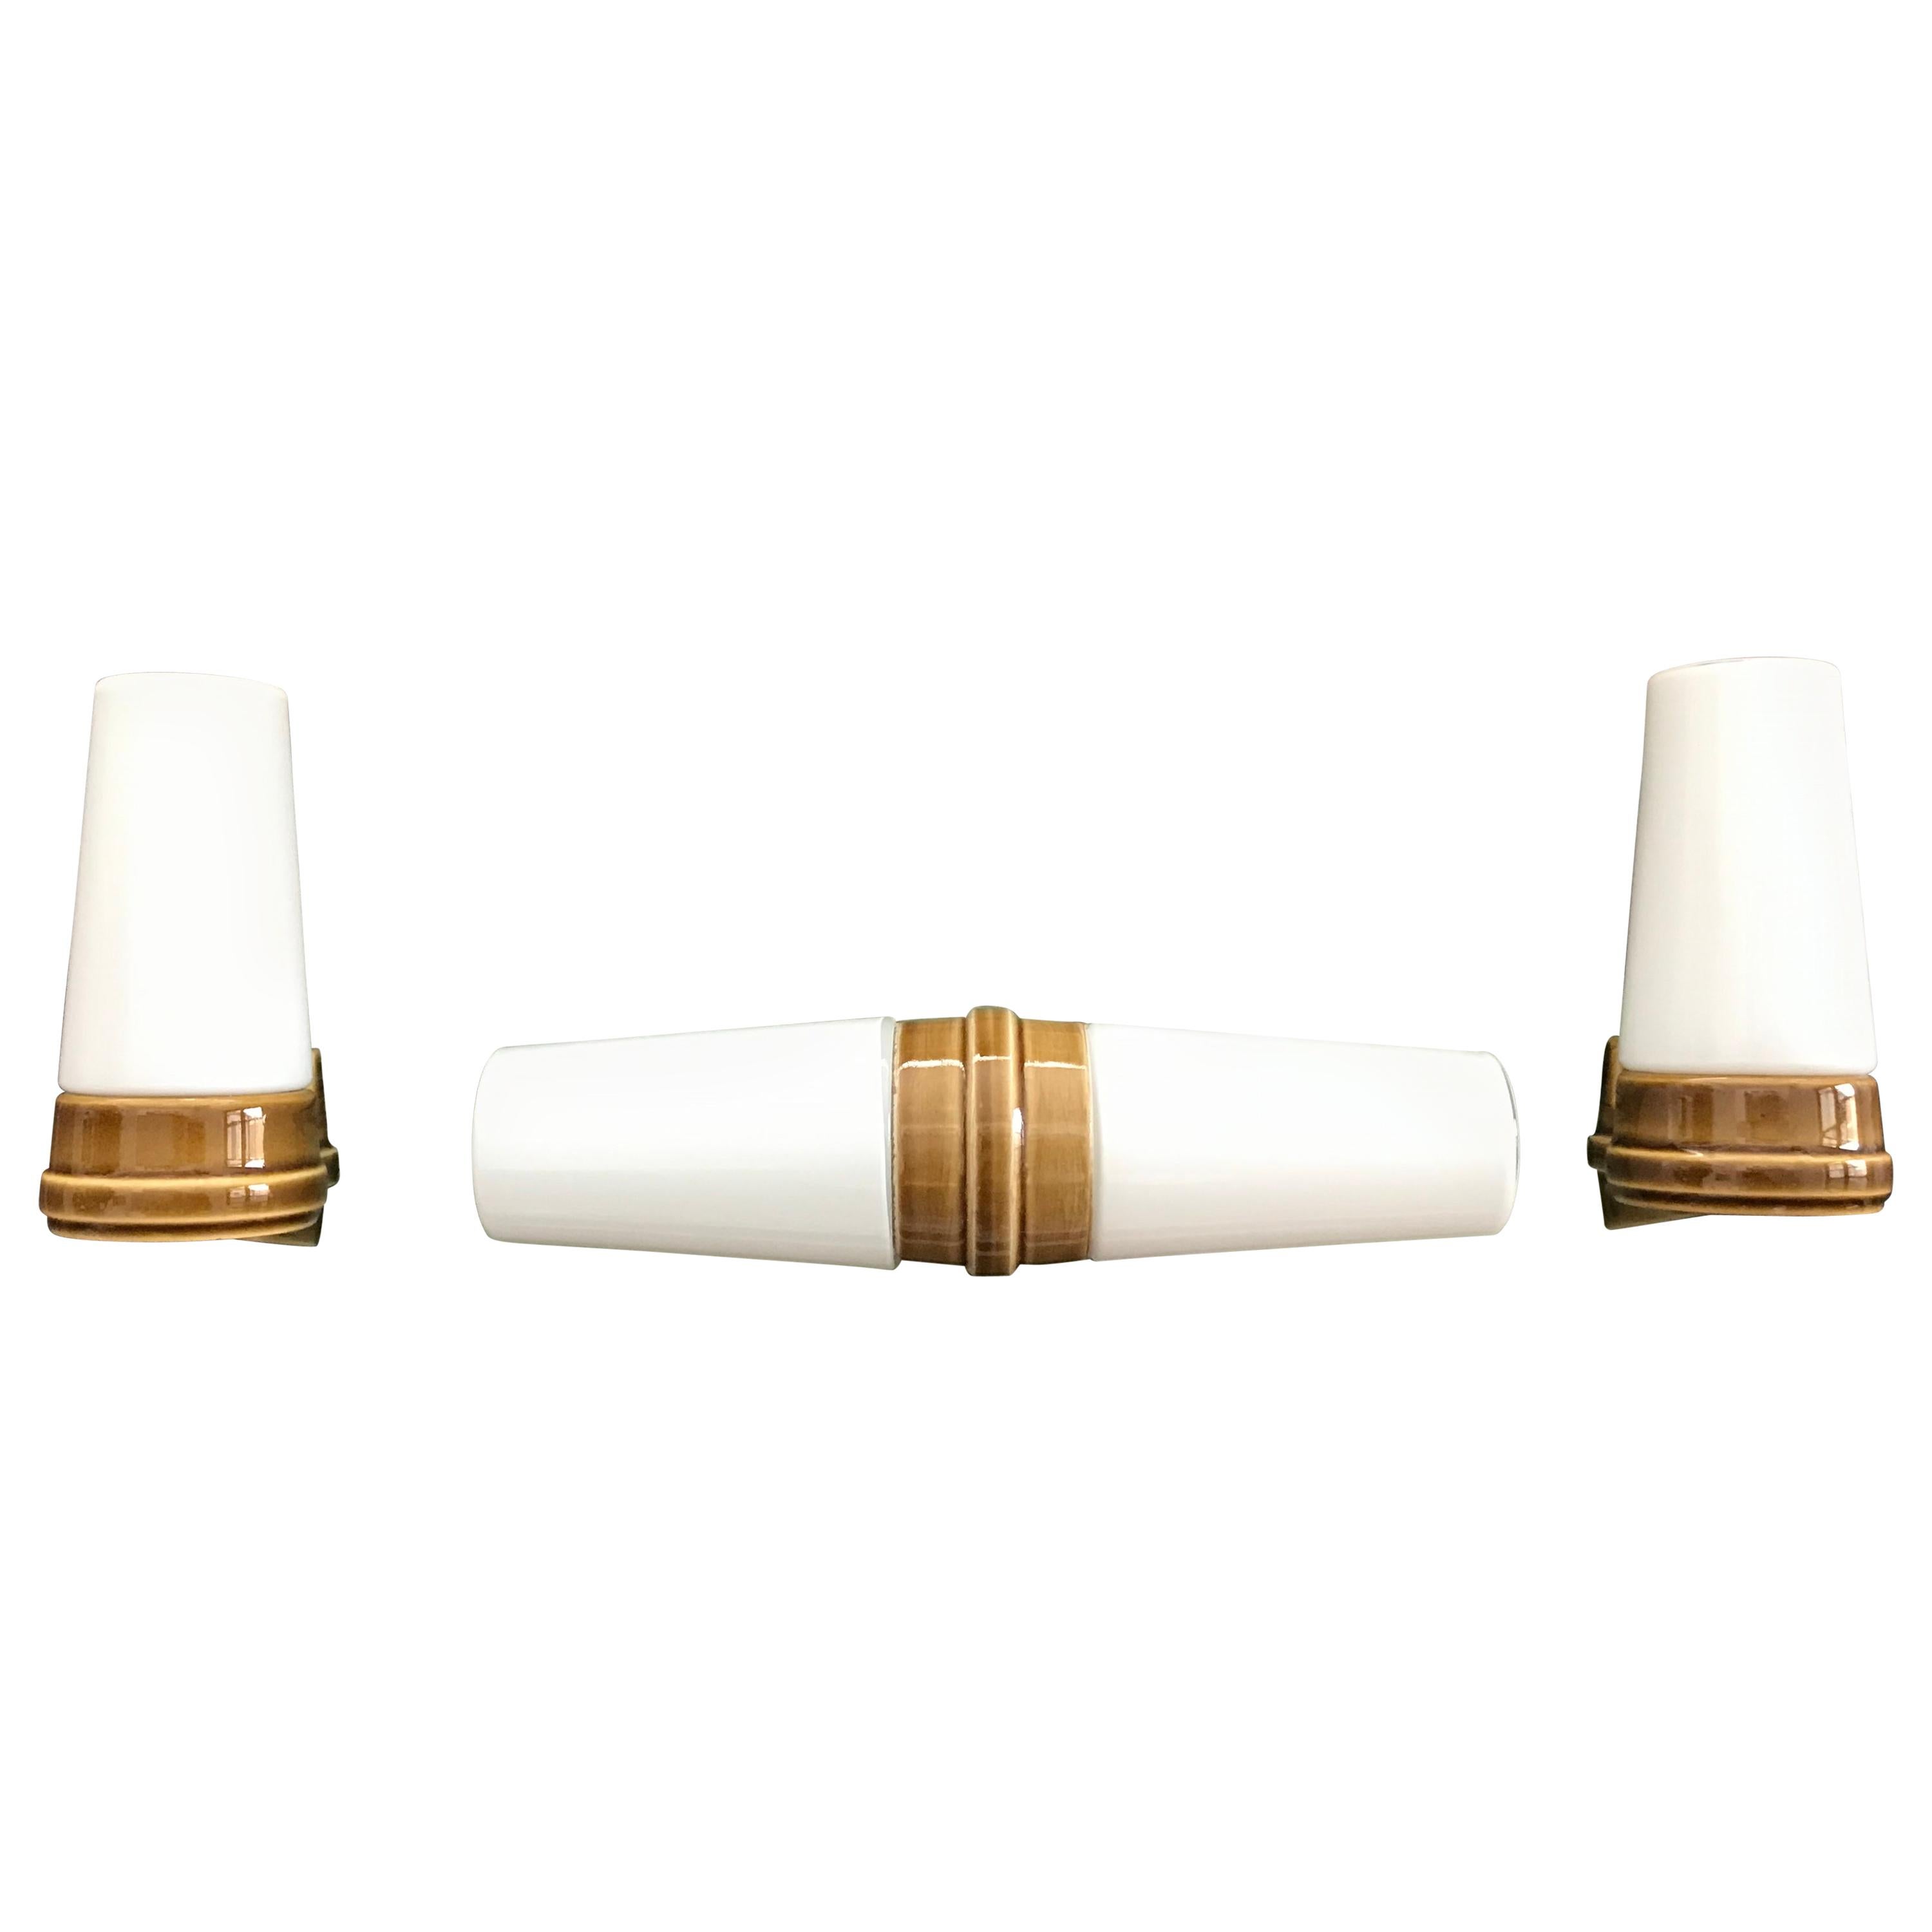 Vintage Ifö of Sweden Ceramic Bathroom Lamps with Opaline Shades from the 1960s